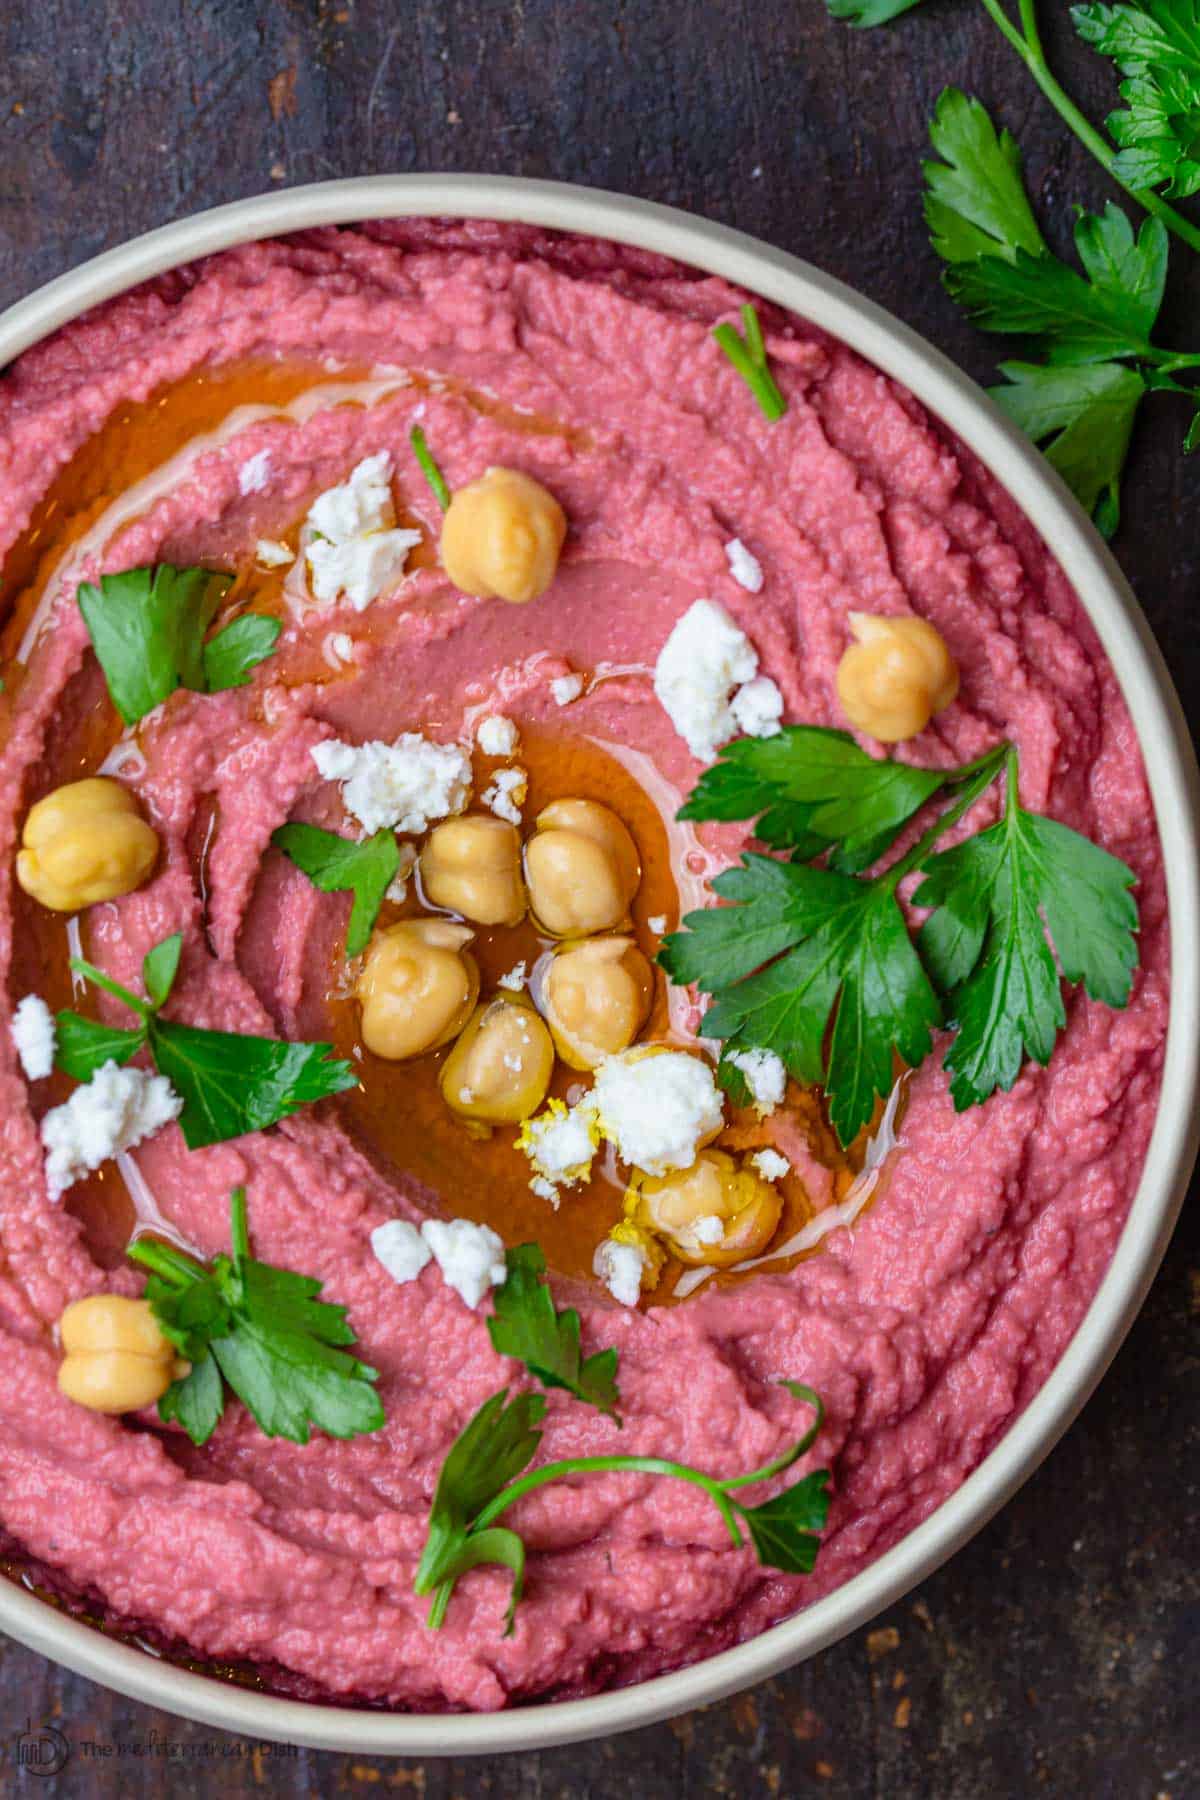 Beet Hummus, topped with chickpeas and parsley for garnish